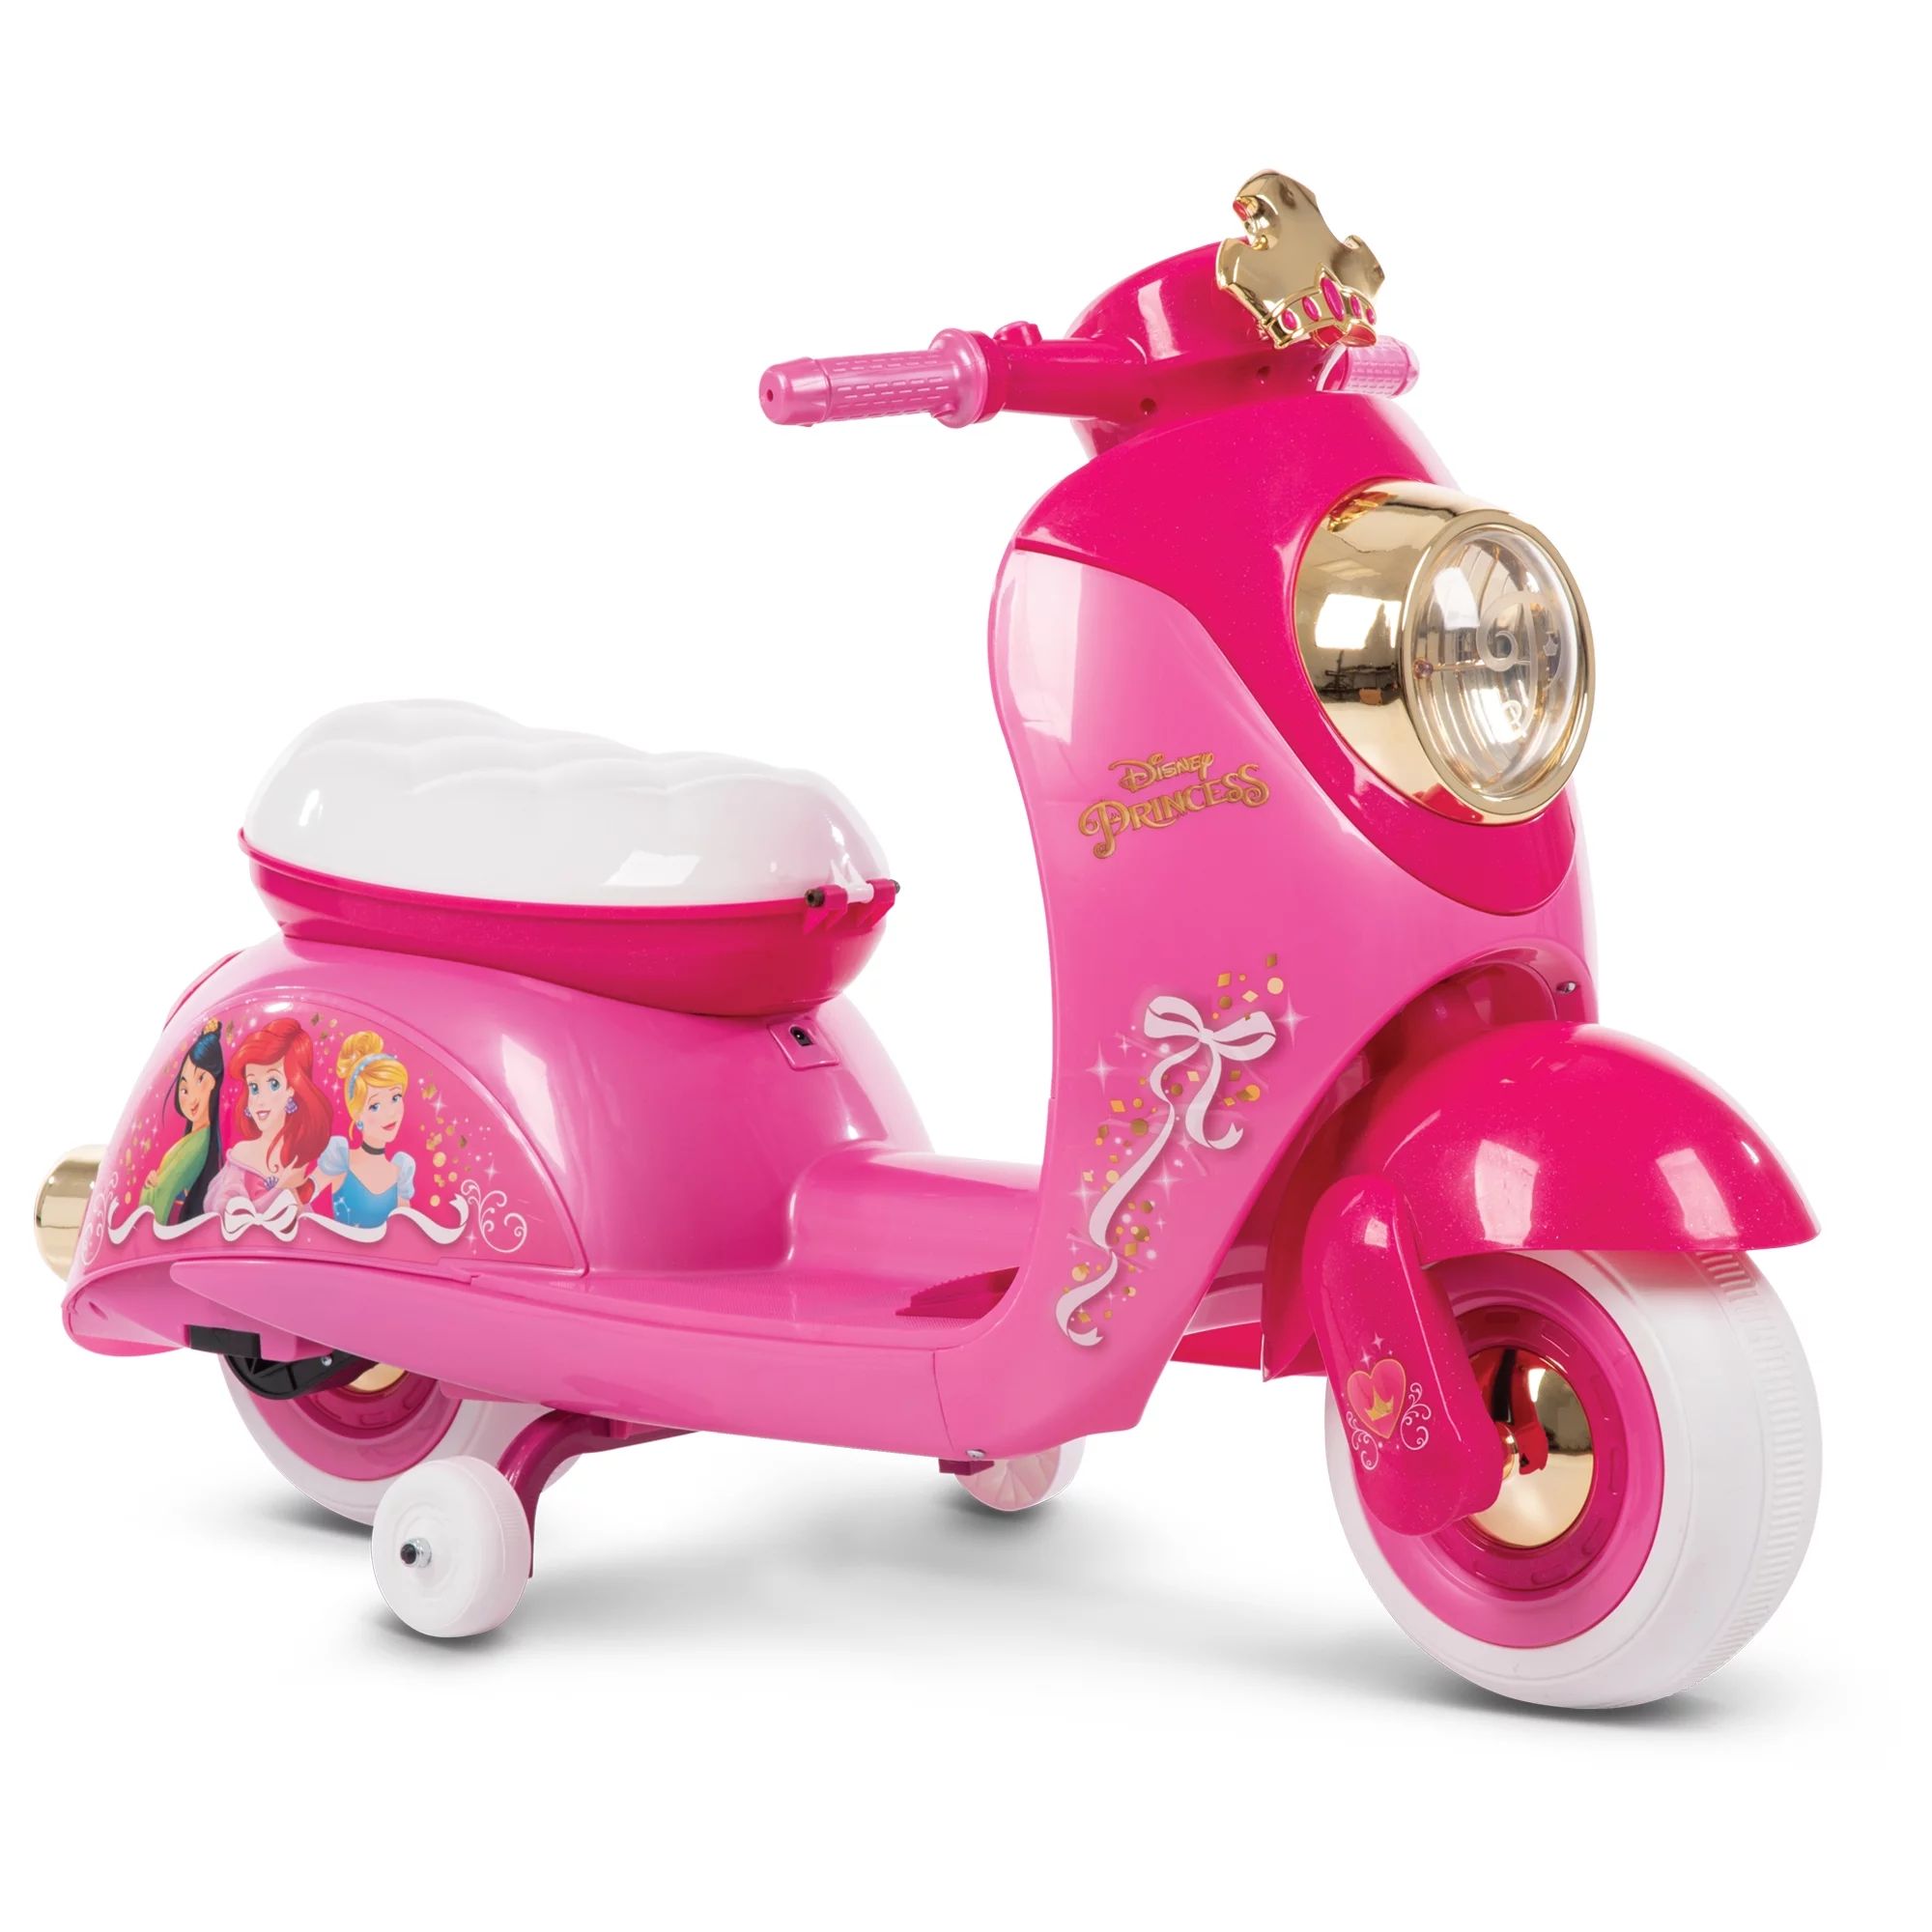 Disney Princess 6 Volt Euro Scooter Ride-on Battery-Powered Toy, Pink by Huffy | Walmart (US)